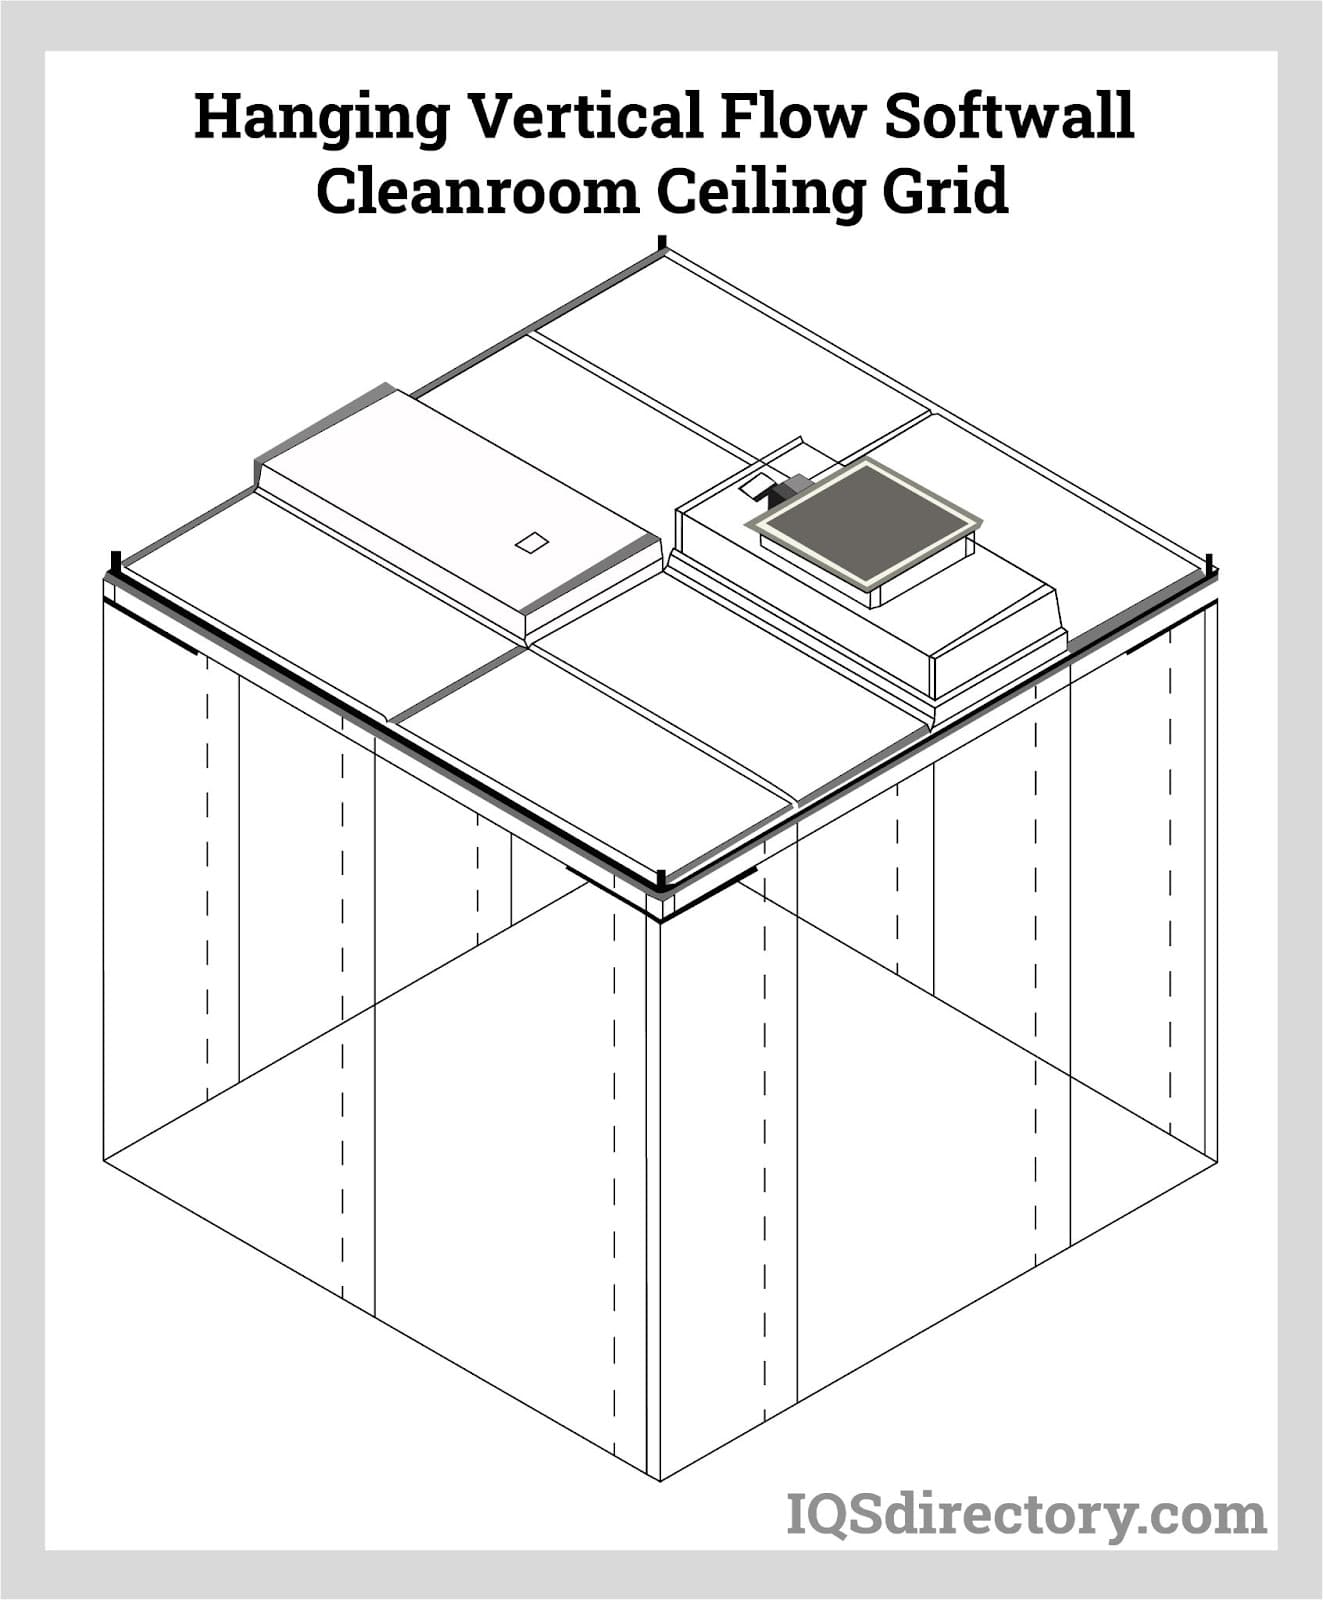 Hanging Vertical Flow Softwall Cleanroom Ceiling Grid